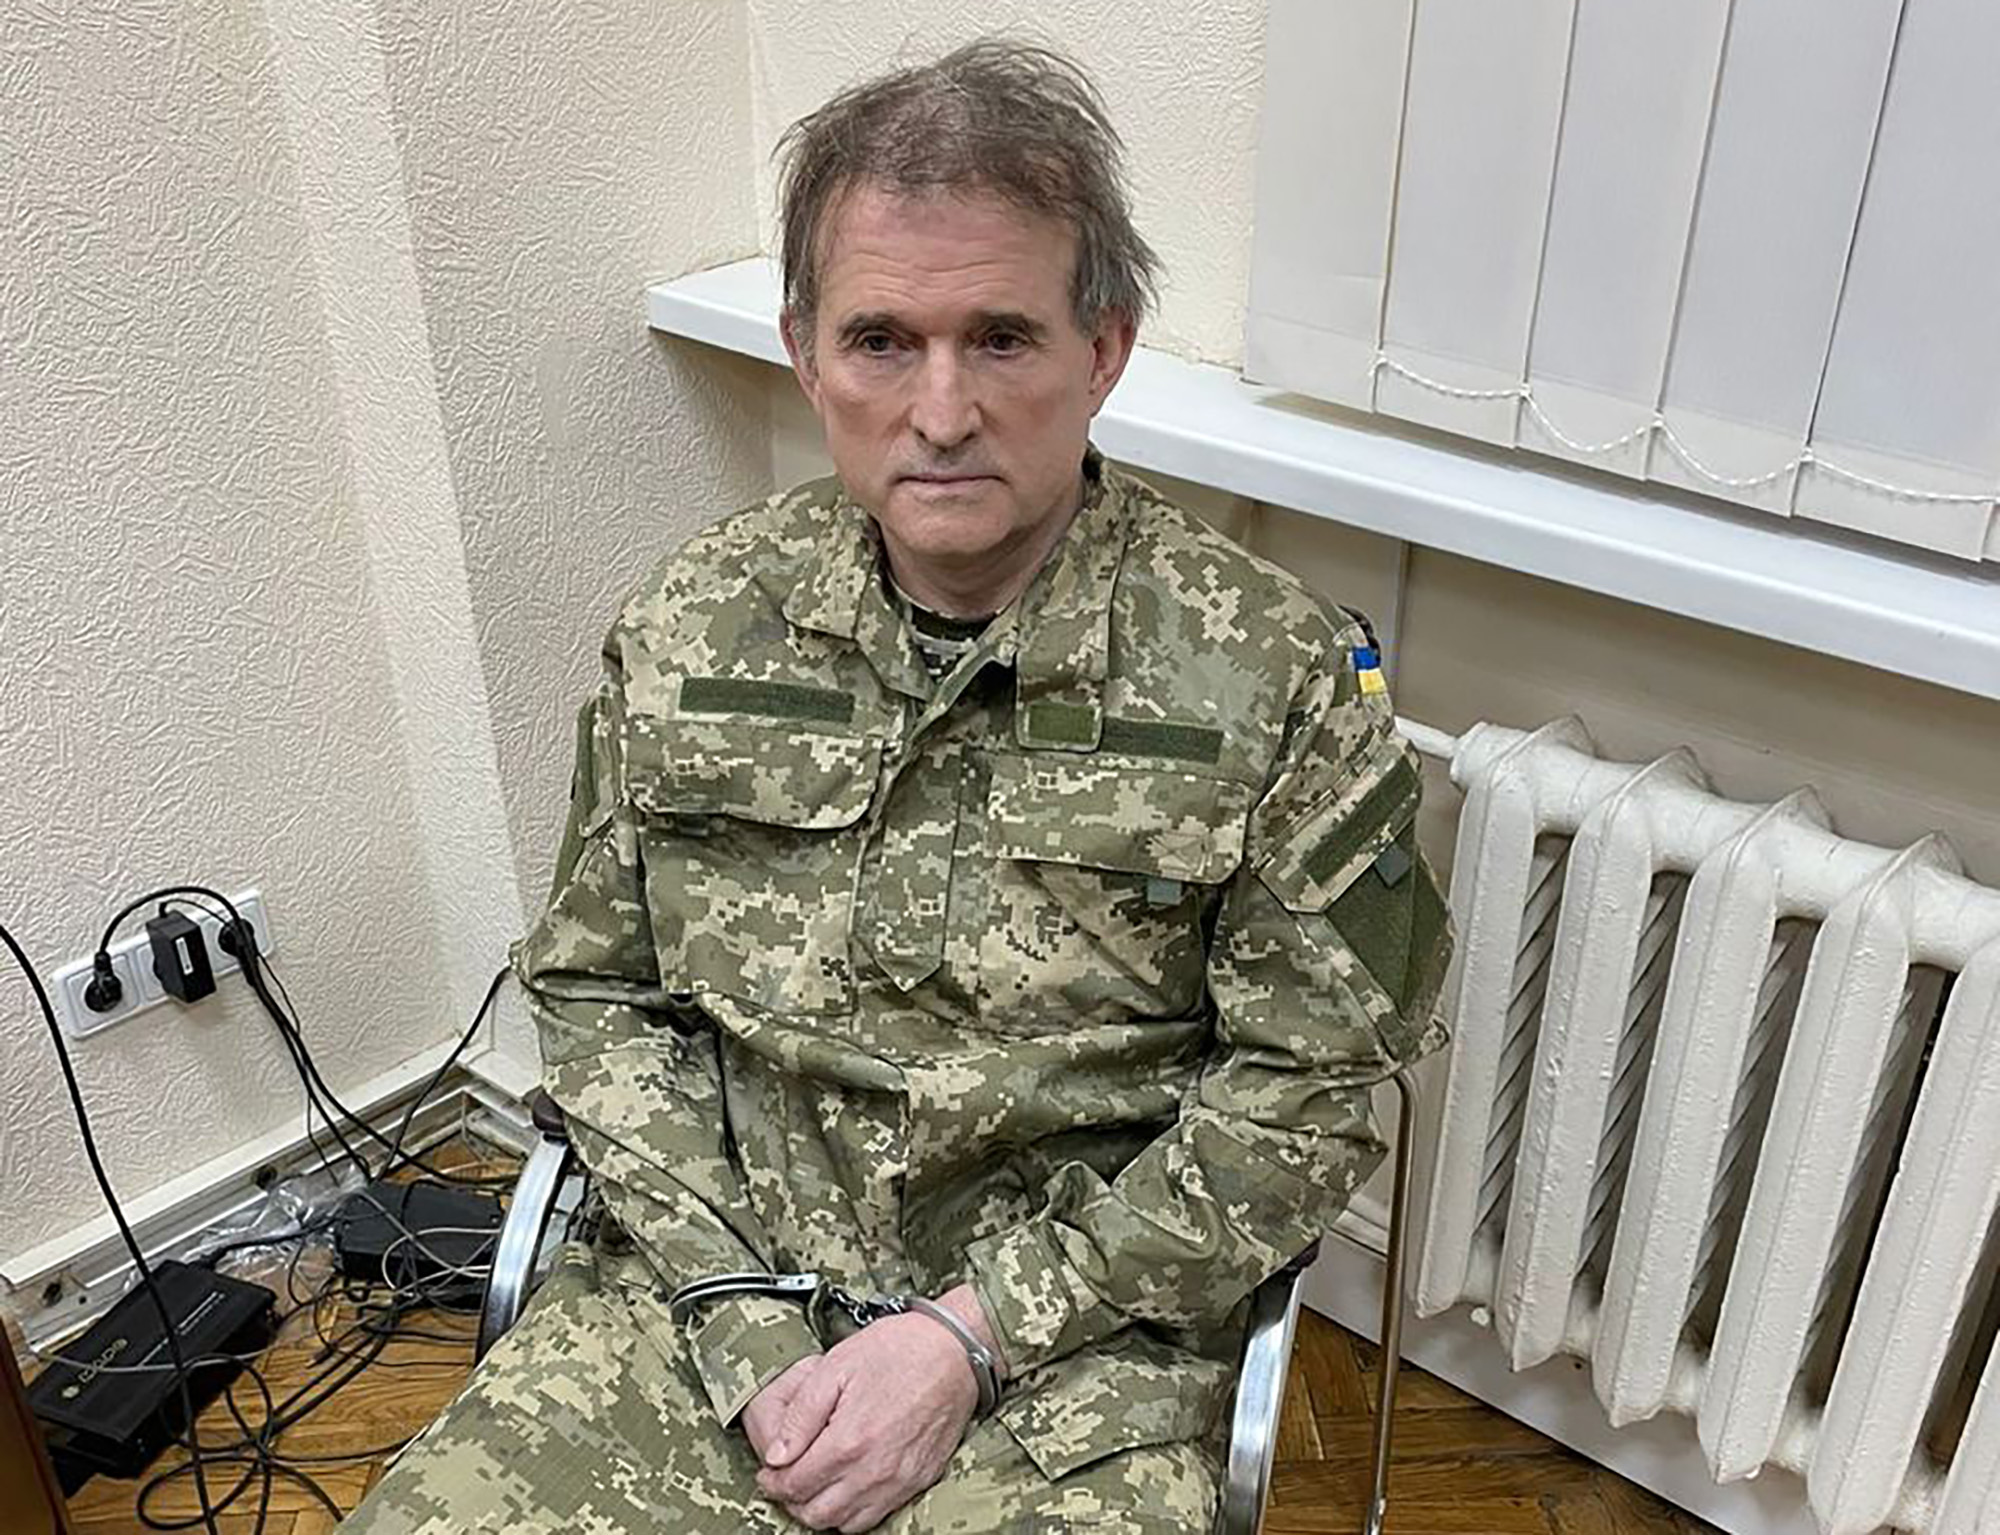 Fugitive oligarch Viktor Medvydchuk sits handcuffed in a chair after a special operation by the Security Service of Ukraine on April 12.